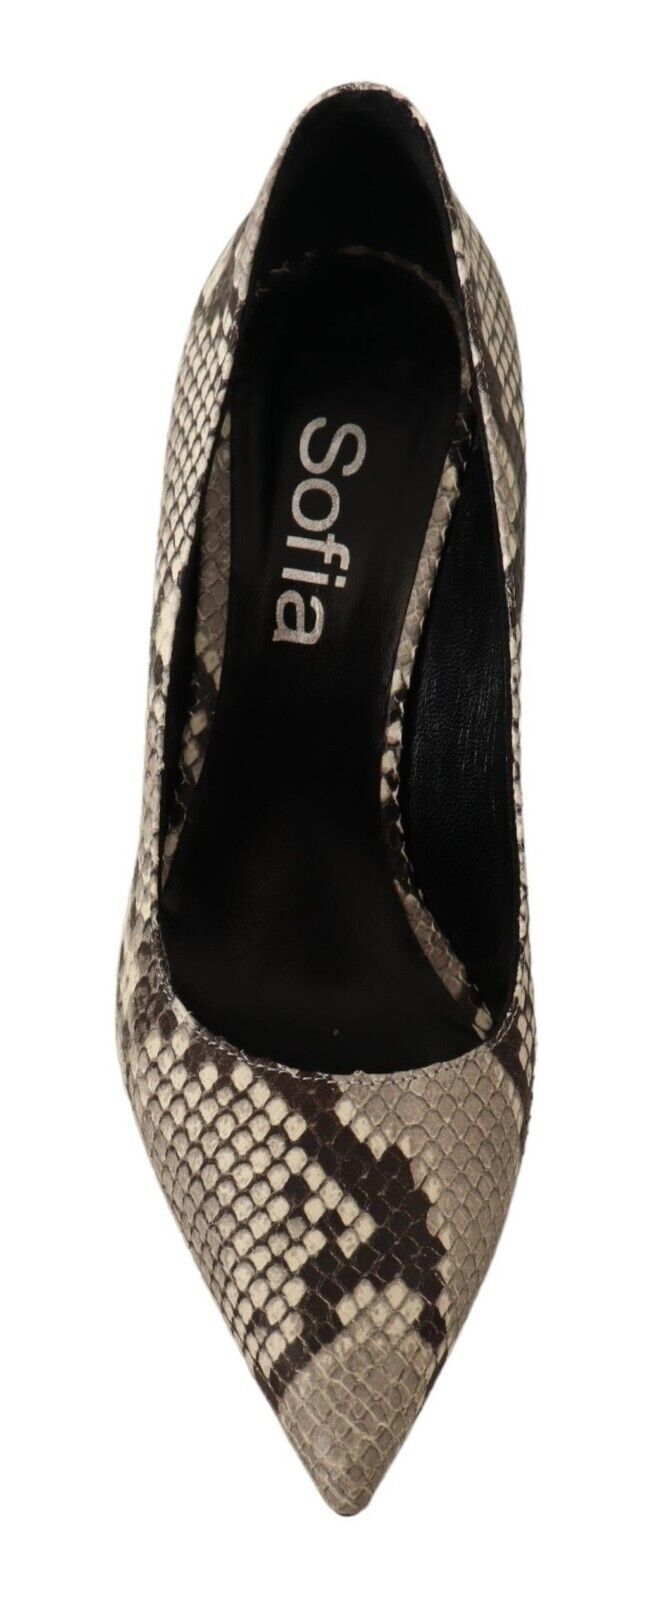 Chic Gray Snake Print Leather Heels